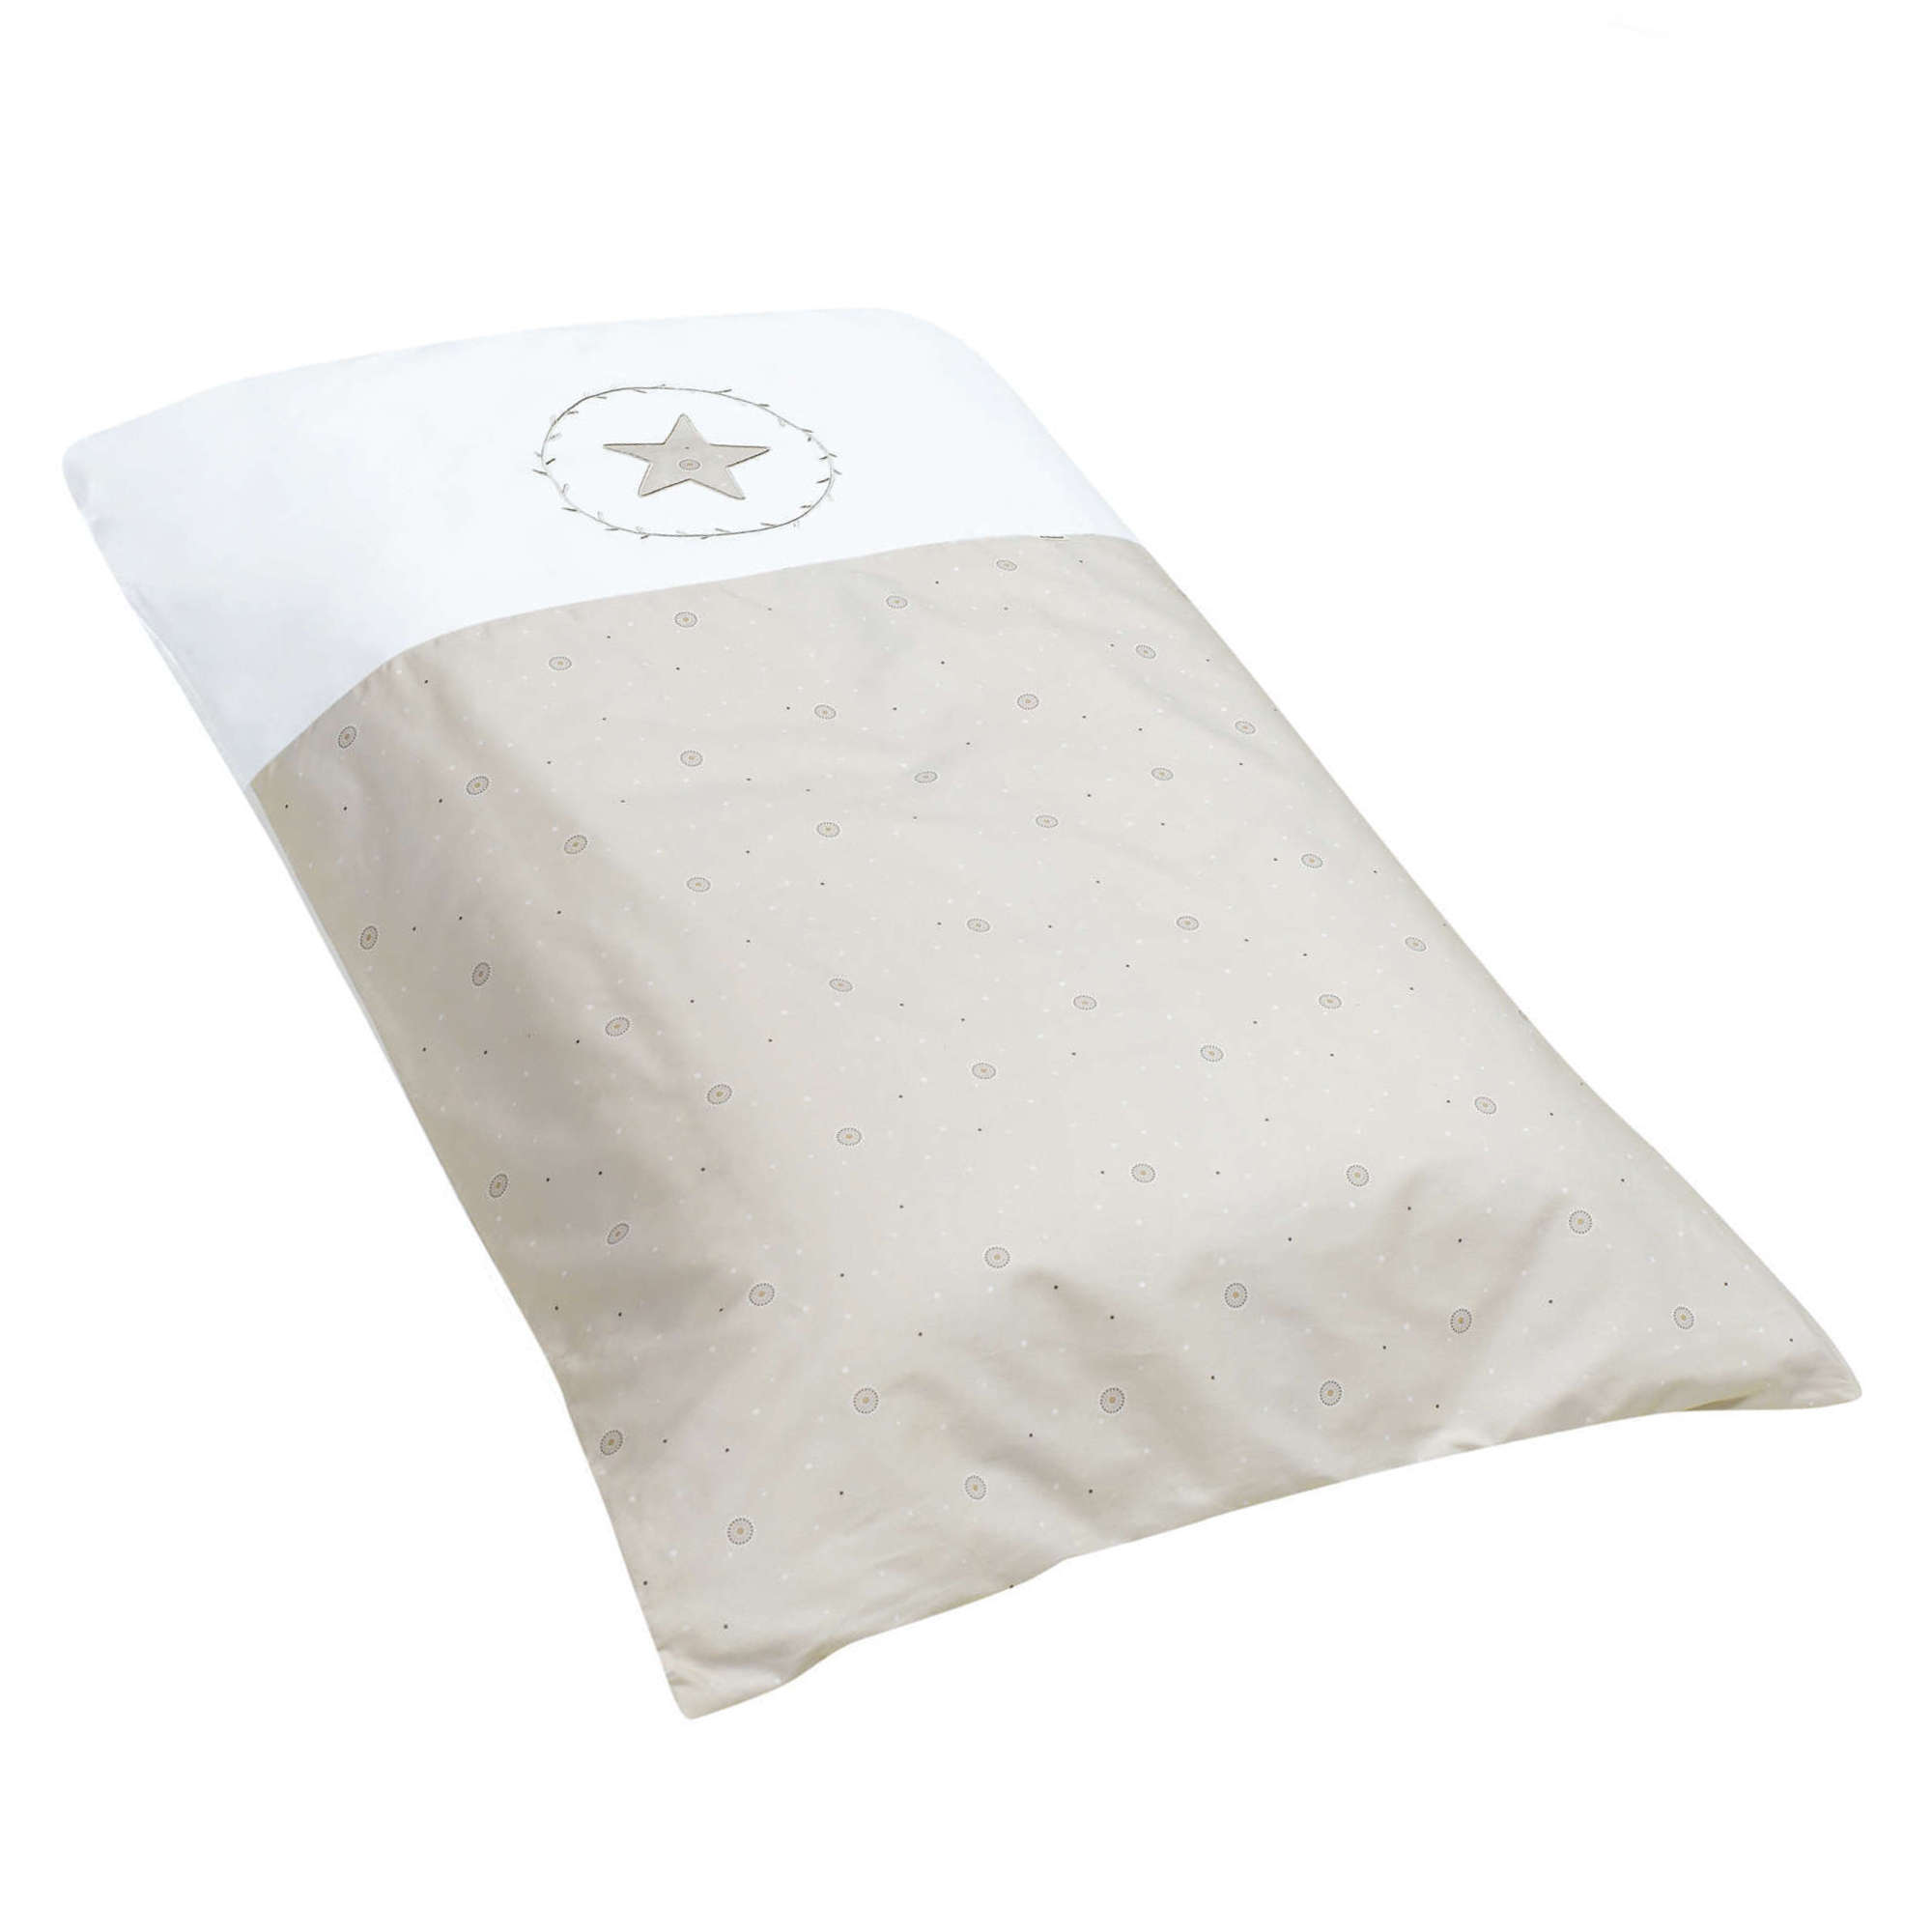 Cot duvet 70x140cm with removable filling